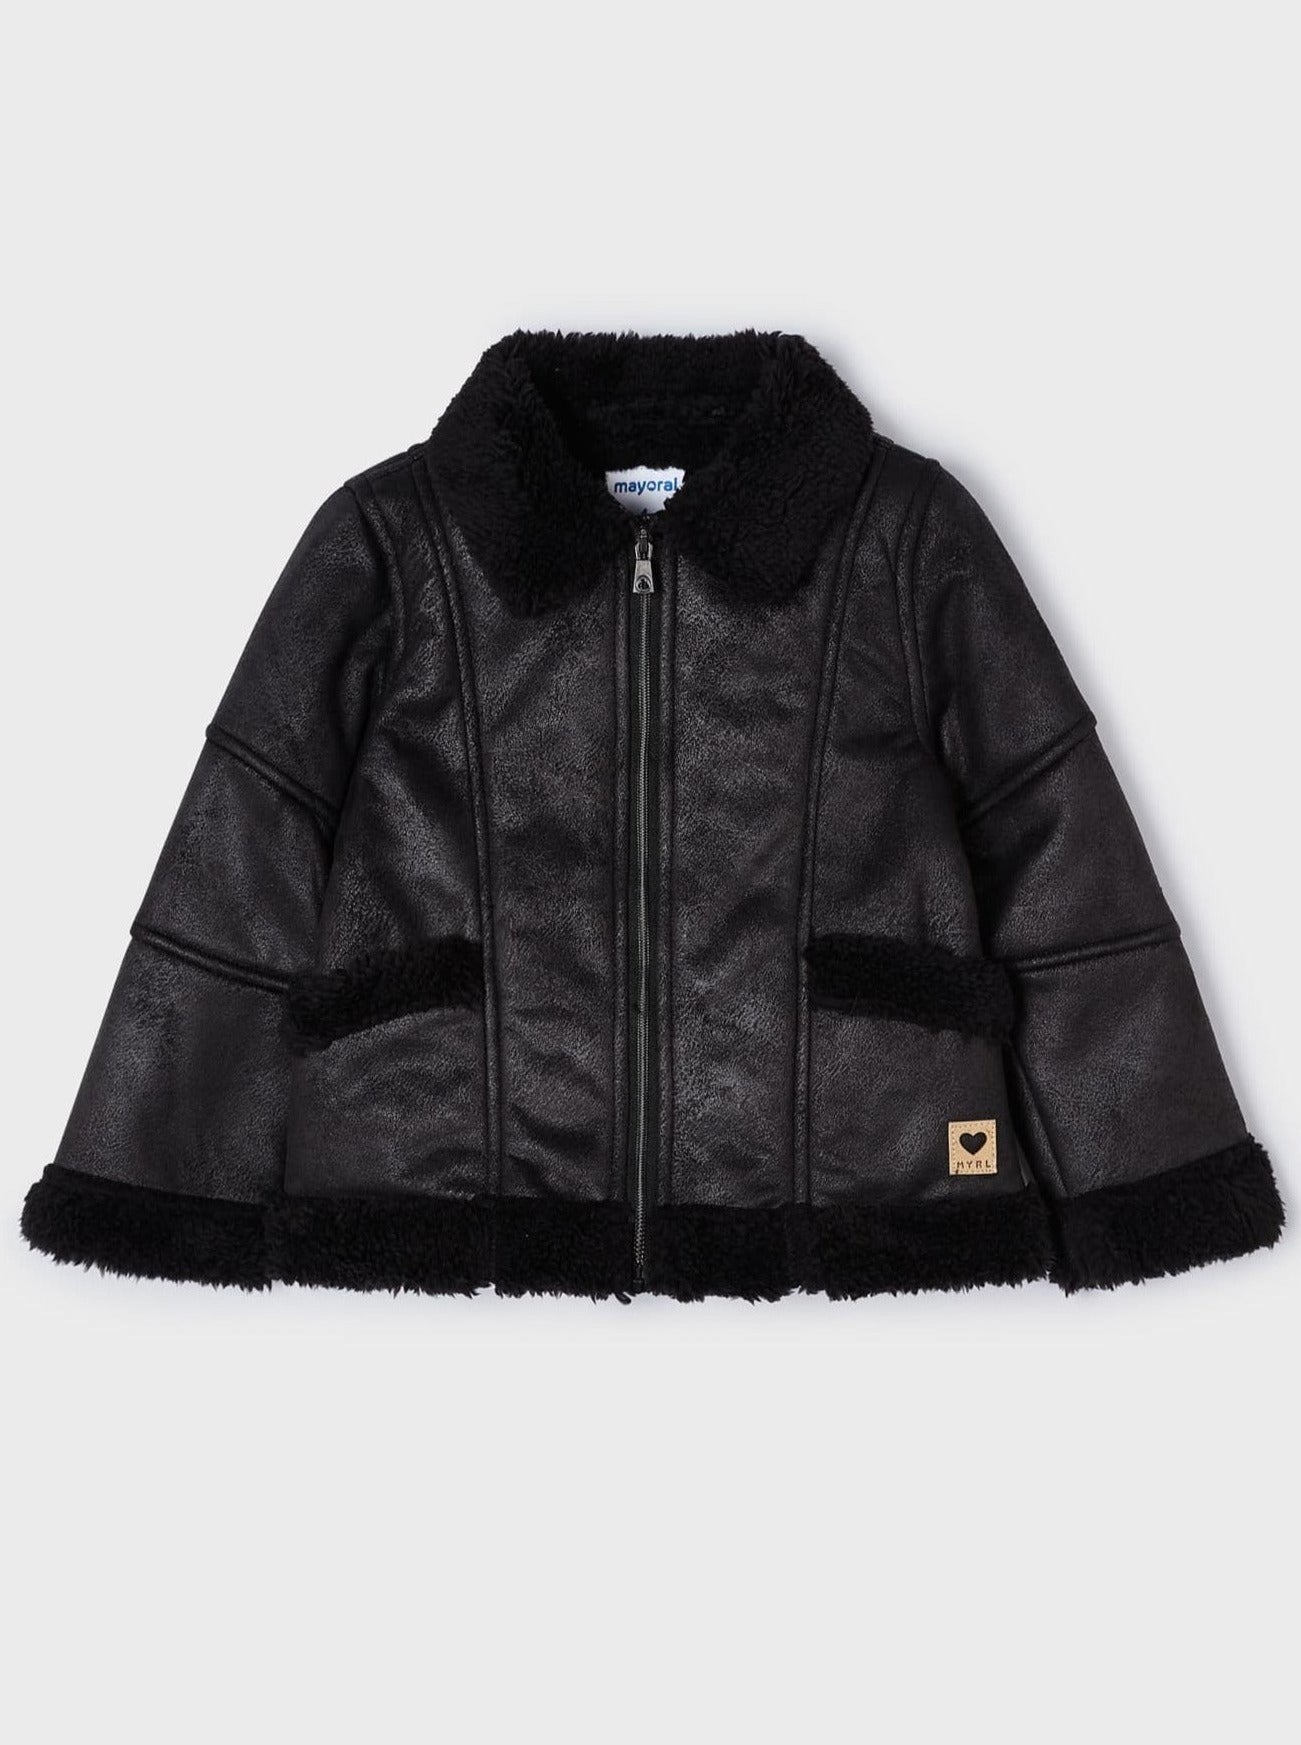 Mayoral Mini Black Shearling Collar Faux Suede Jacket _4414-85